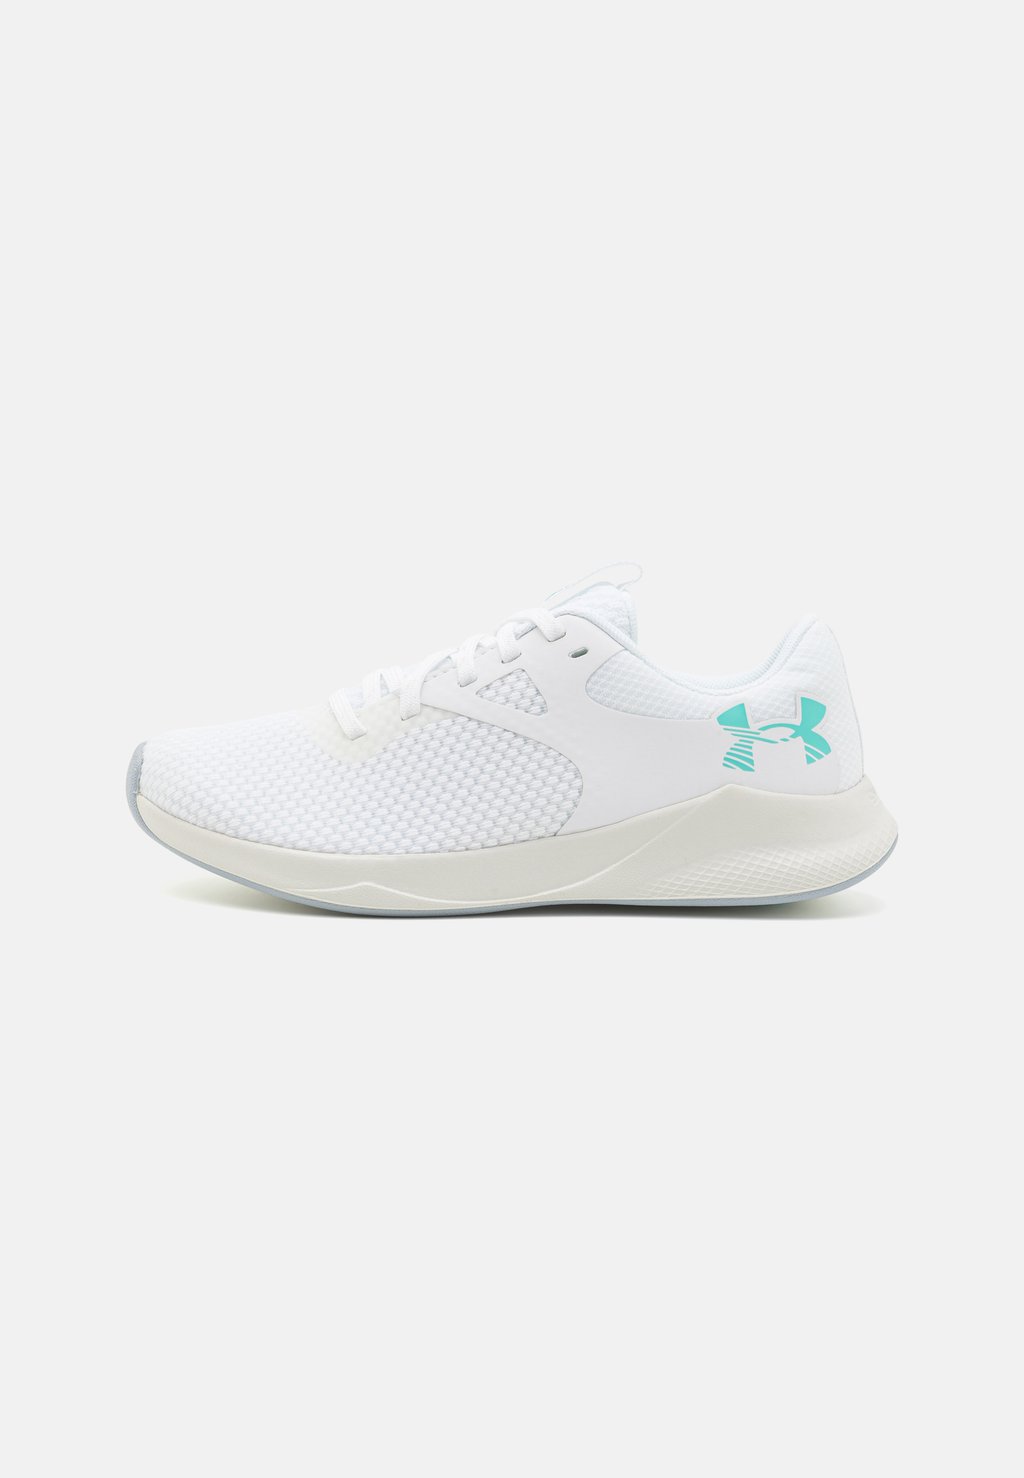 Кроссовки CHARGED AURORA Under Armour, цвет white/white clay/radial turquoise